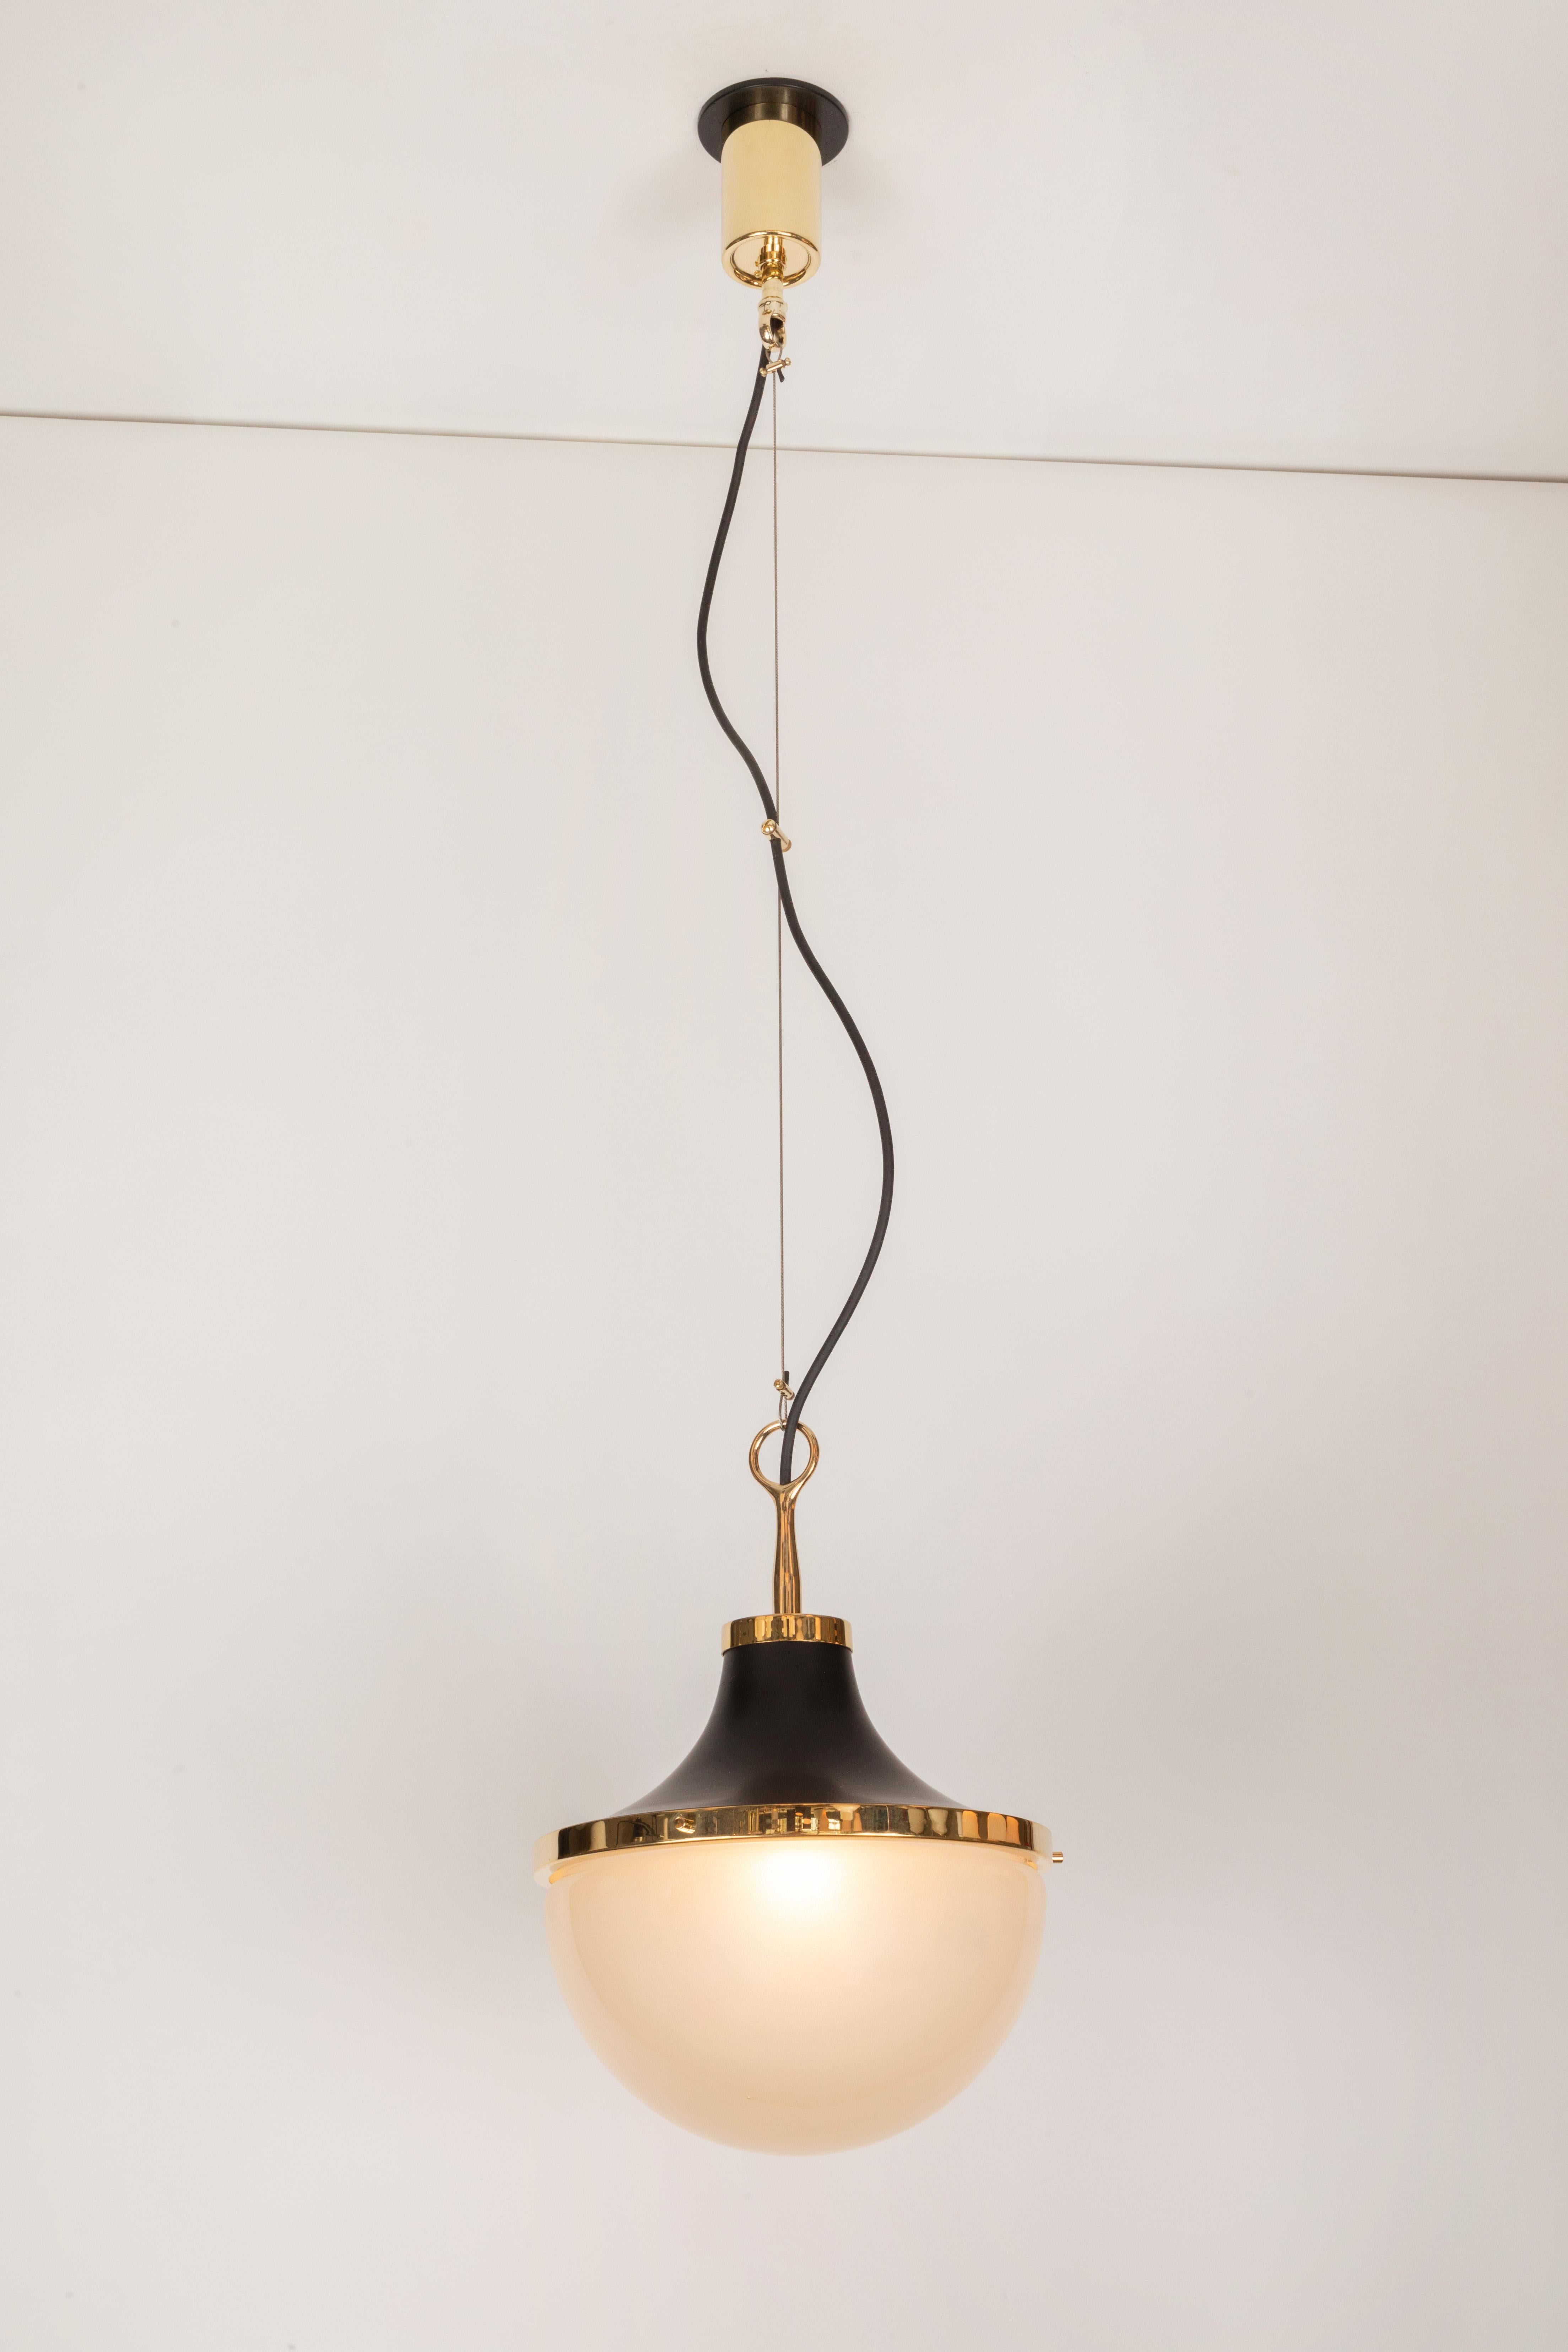 1960s Sergio Mazza 'Pi' pendant in brass and black metal for Artemide. Executed in black painted metal, polished brass and opaline glass, Italy, circa 1962. Height can be adjusted by several inches.

Born in Italy in 1931, Sergio Mazza created